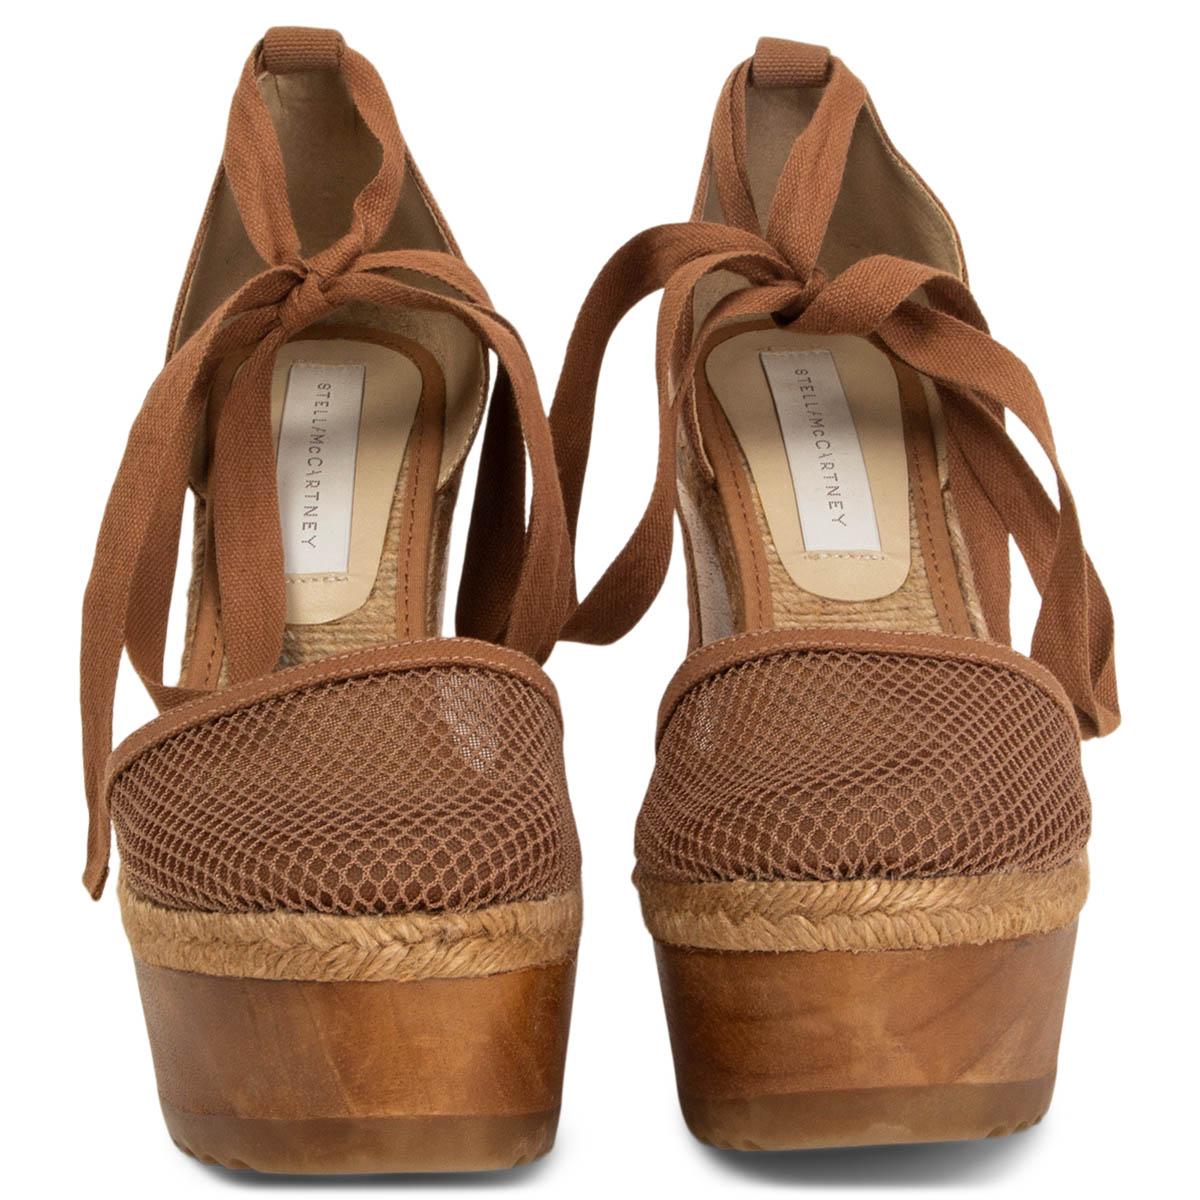 100% authentic Stella McCartney brown wooden and mesh espadrilles ankle strap wedges. Have been worn and are in excellent condition. 

Shoe Size	38
Inside Sole	25cm (9.8in)
Width	8cm (3.1in)
Heel	12cm (4.7in)
Platform:	5cm (2in)

All our listings